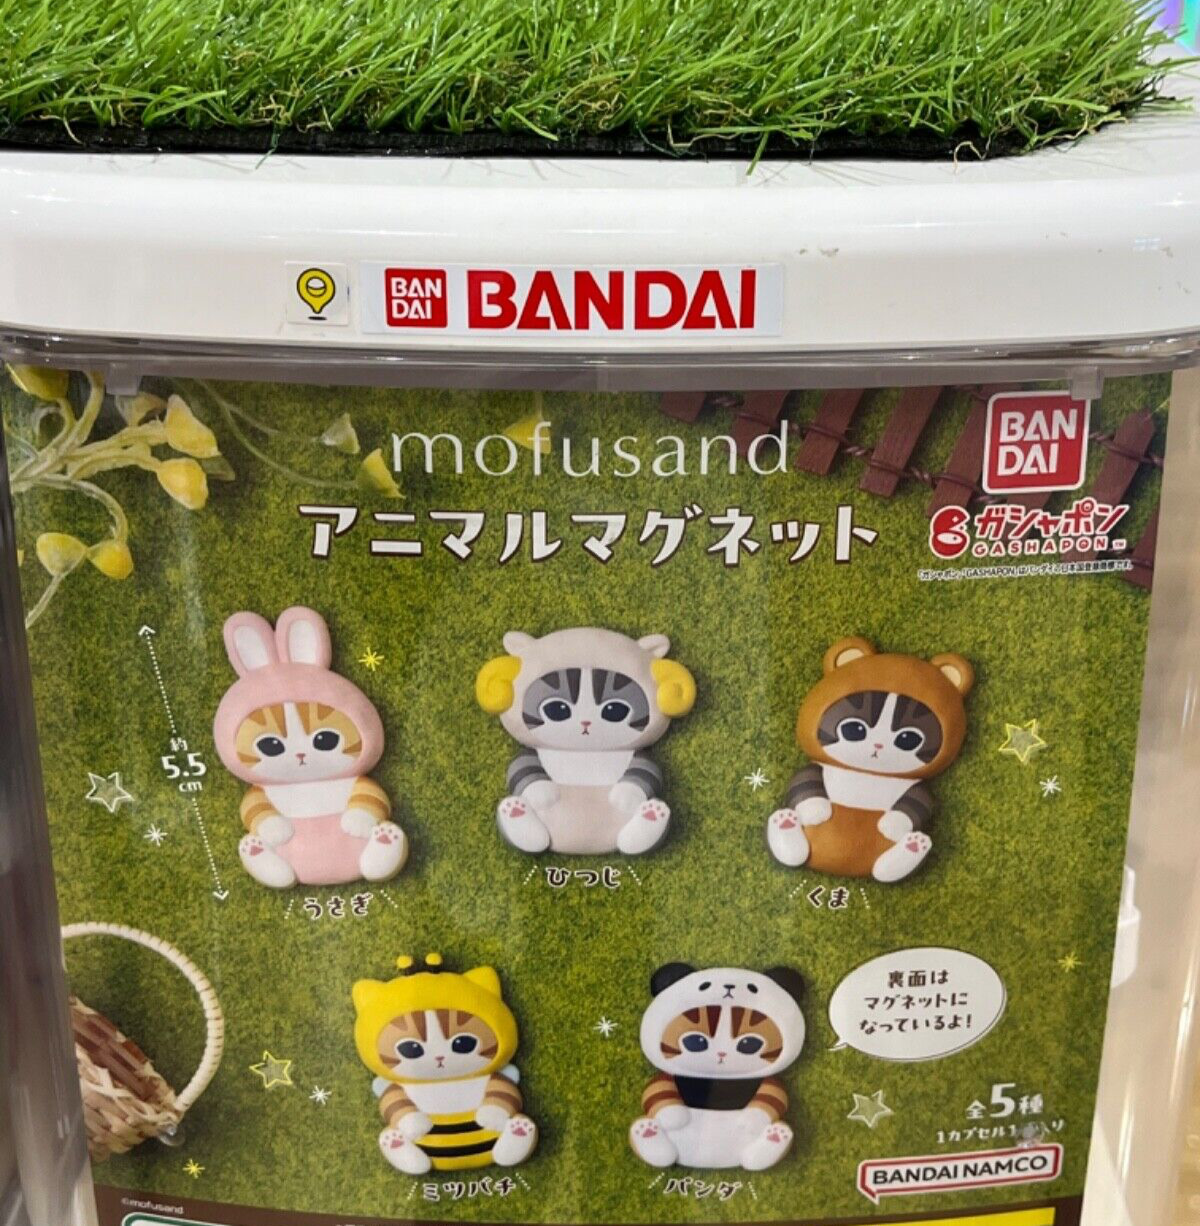 mofusand Animal Magnet Capsule toys All 5types Complete Set BANDAI Japan